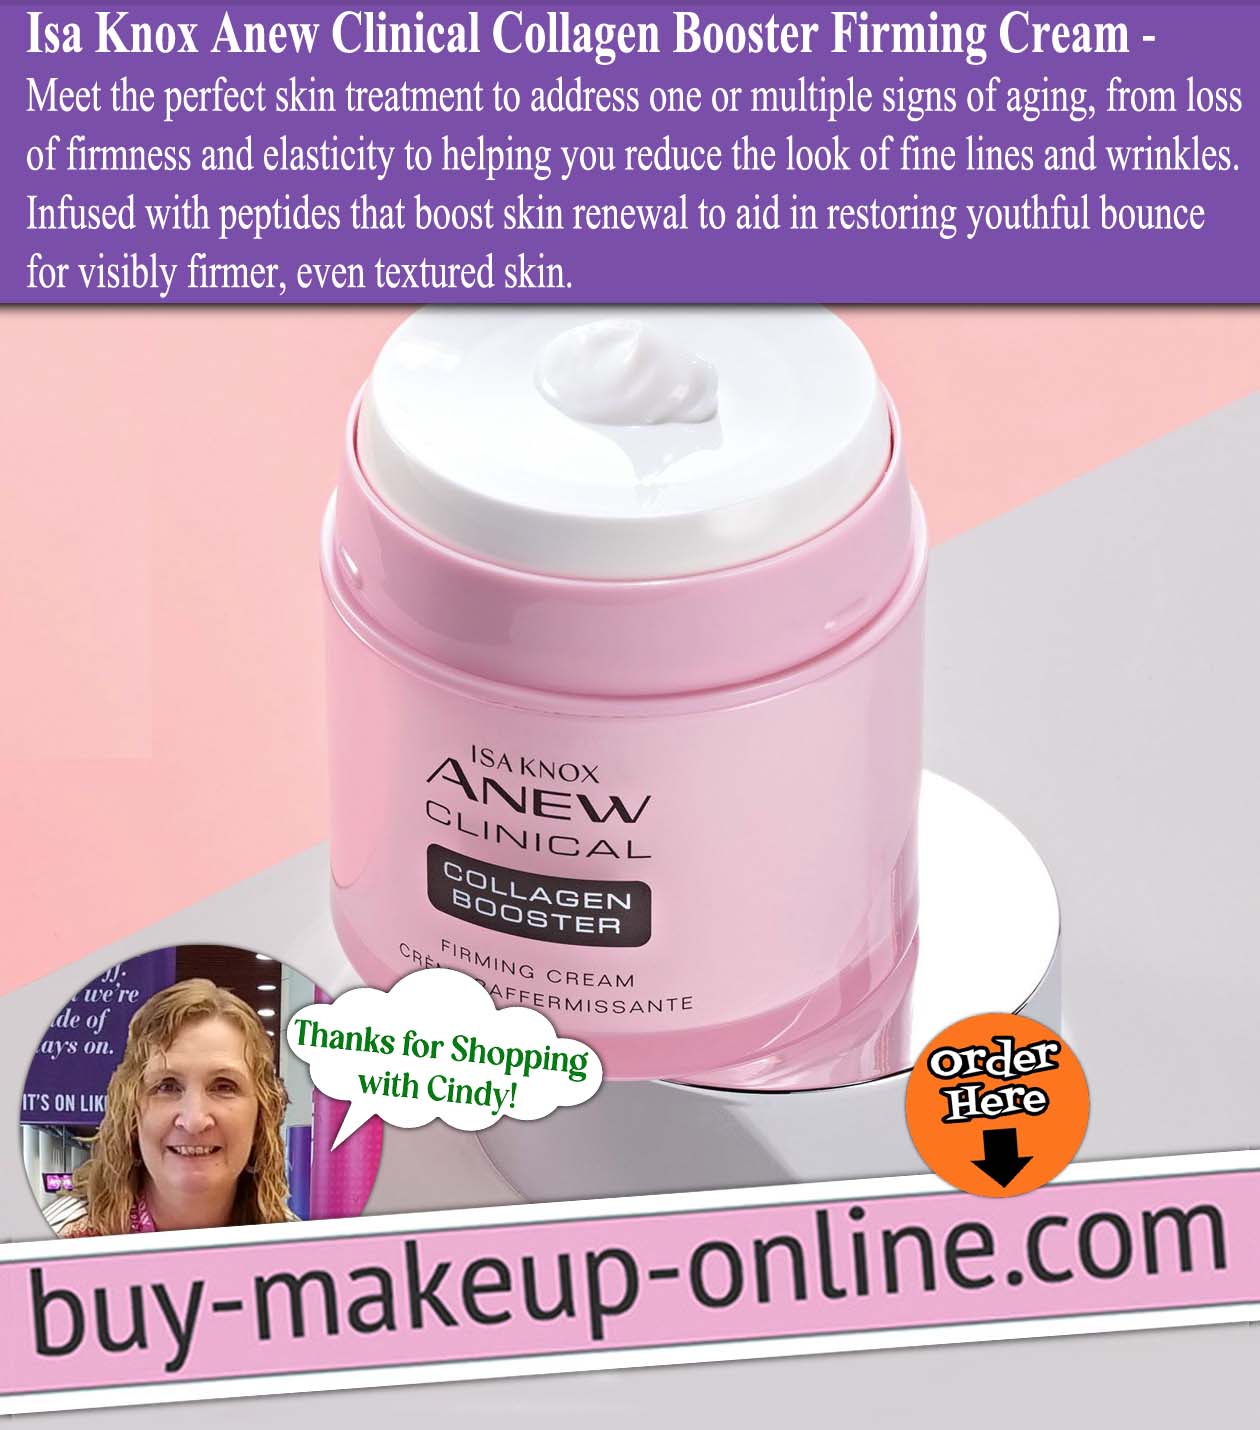 AVON Isa Knox Anew Clinical Collagen Booster Firming Cream 